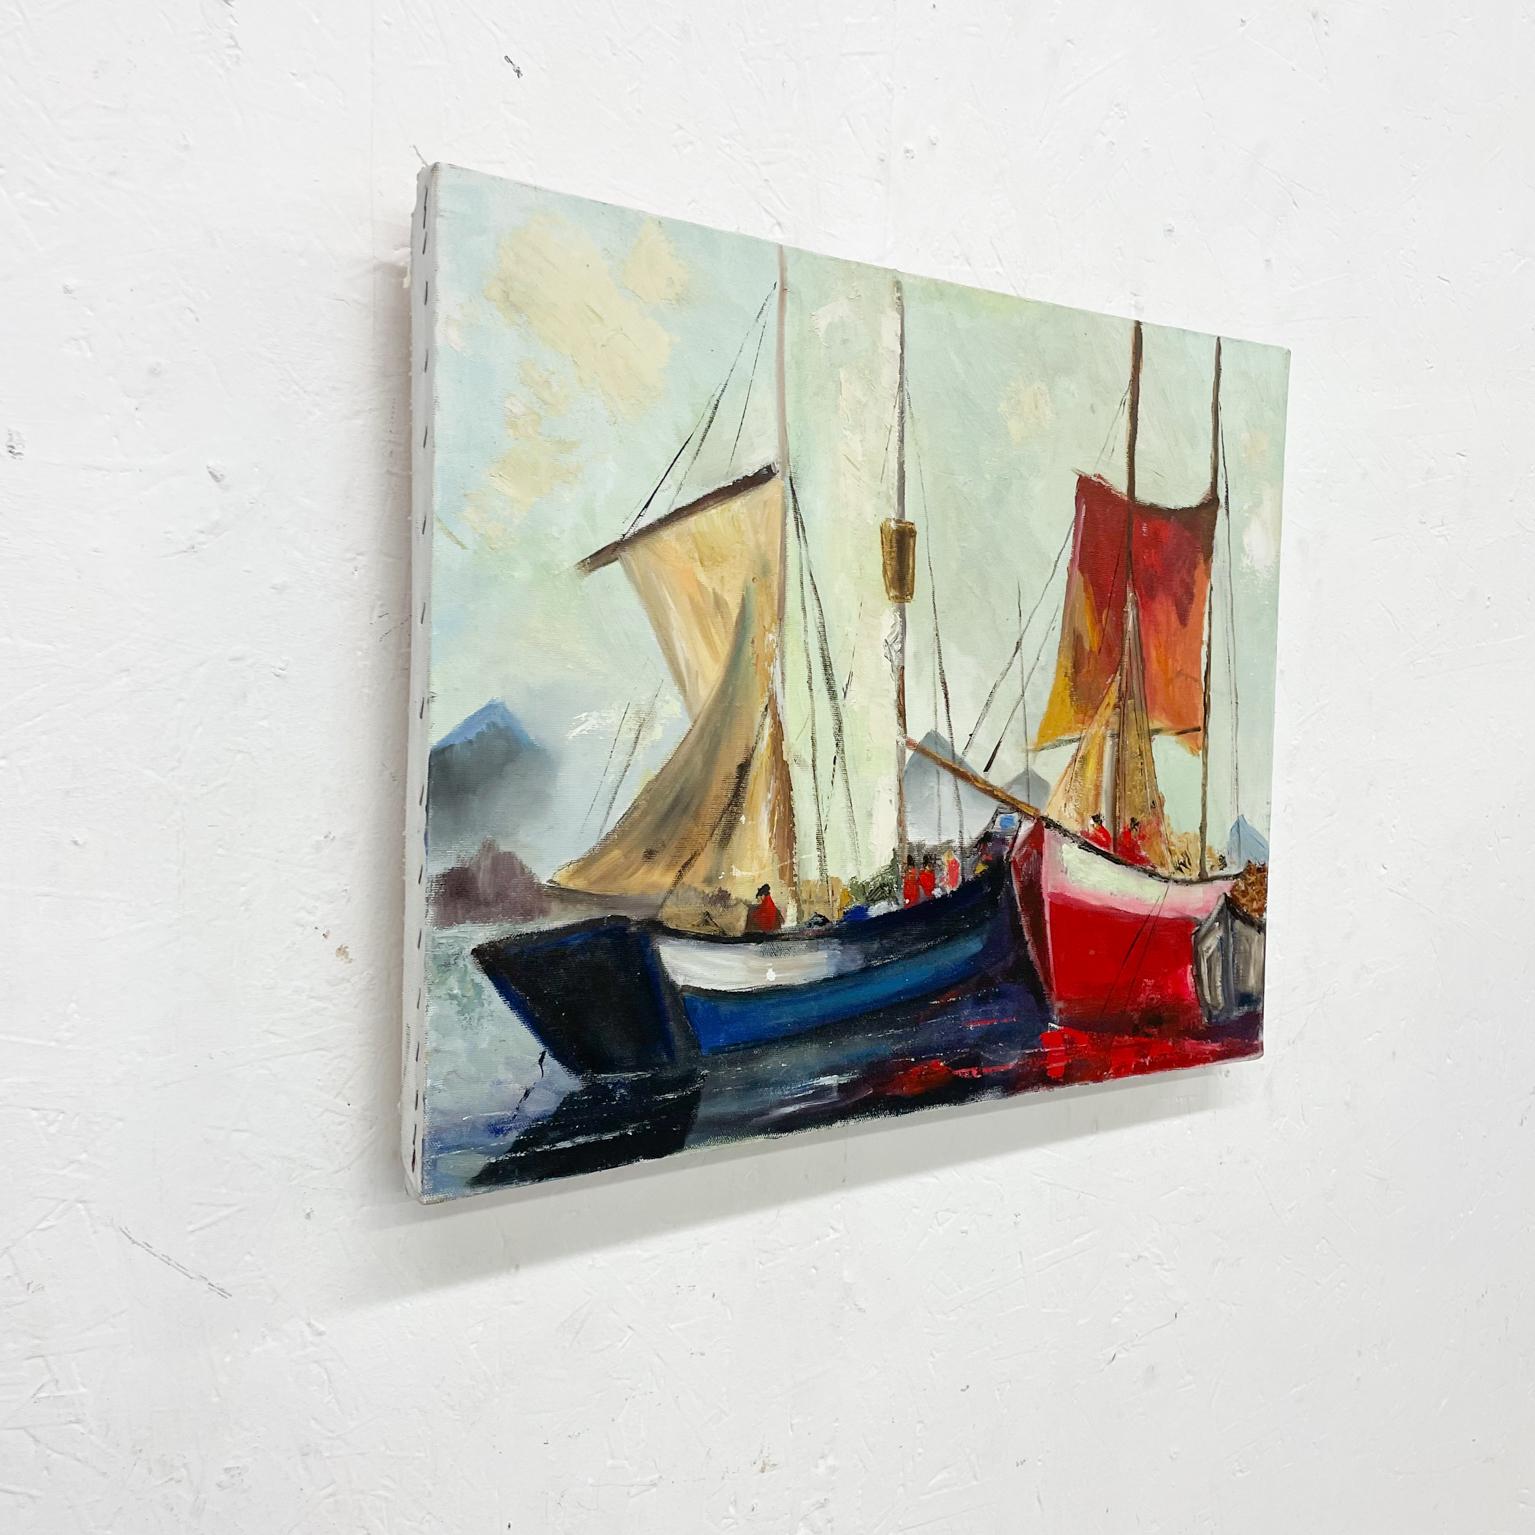 American Modern Sailboat Art Oil Painting on Canvas in Red White and Blue For Sale